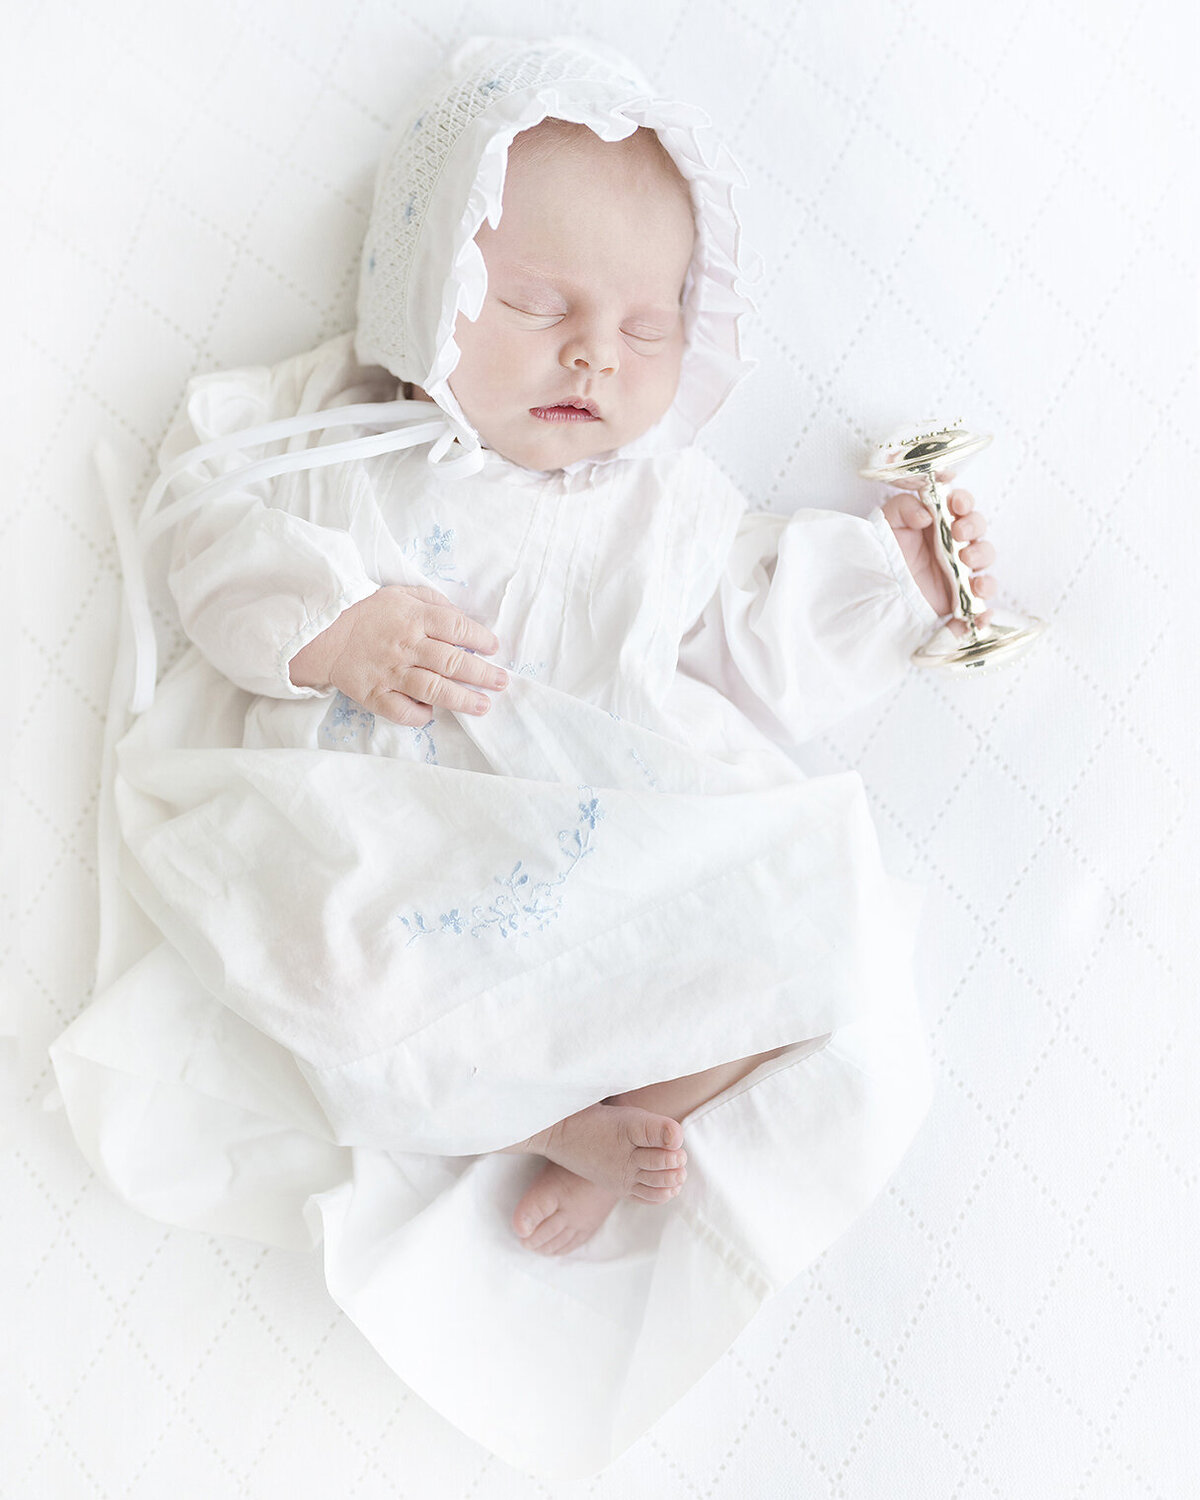 newborn baby in a grandmillenial style feltman brothers dress with a silver rattle